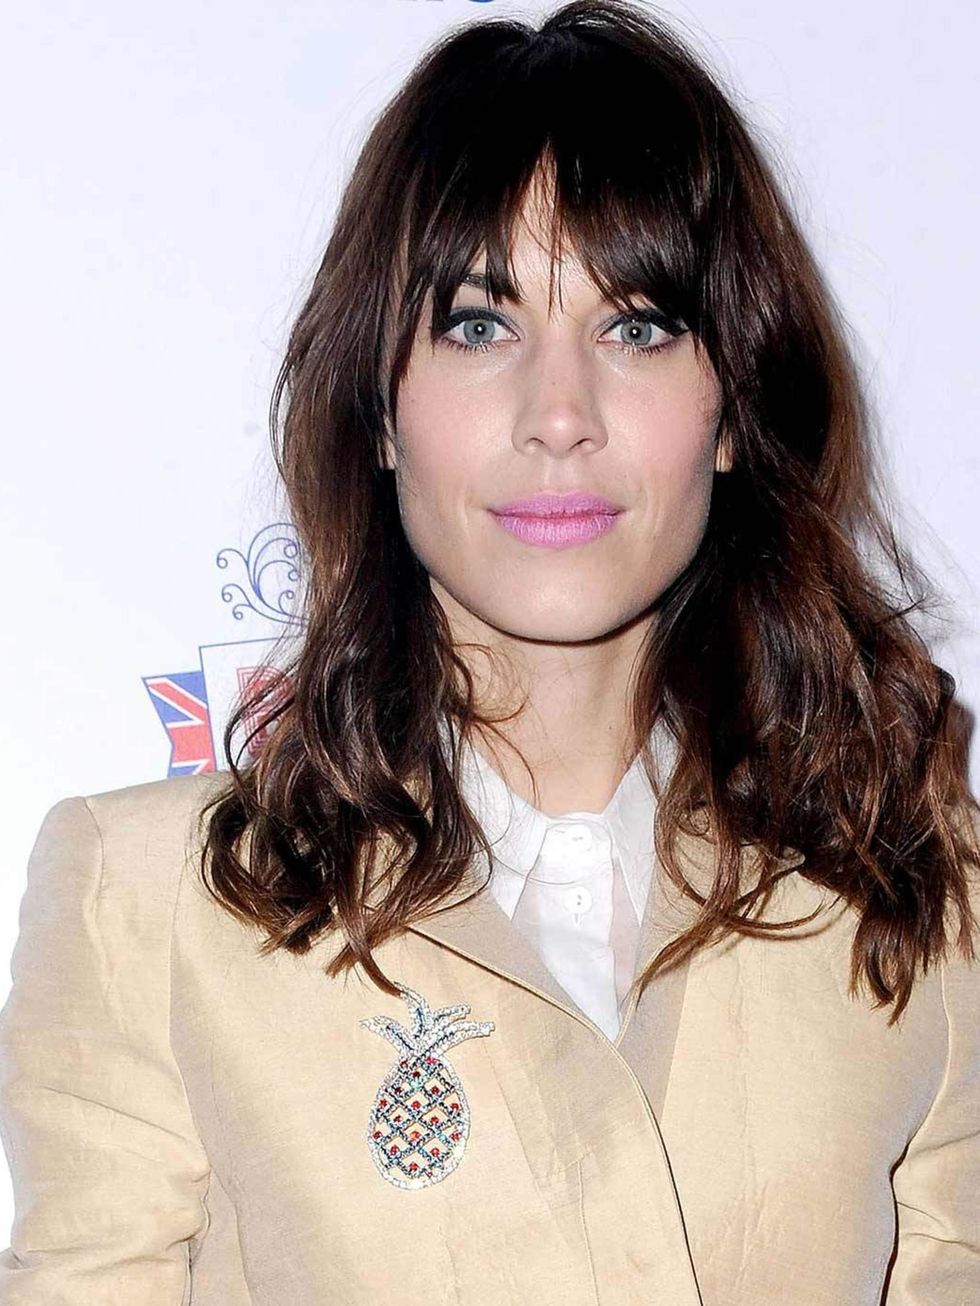 <p><strong><a href="http://www.elleuk.com/star-style/celebrity-style-files/alexa-chung-s-style-file">Alexa Chung</a></strong></p><p>Alexas stepped away from her staple red lip and opted for a chalkie, pastel pink shade thats pretty and feminine but also